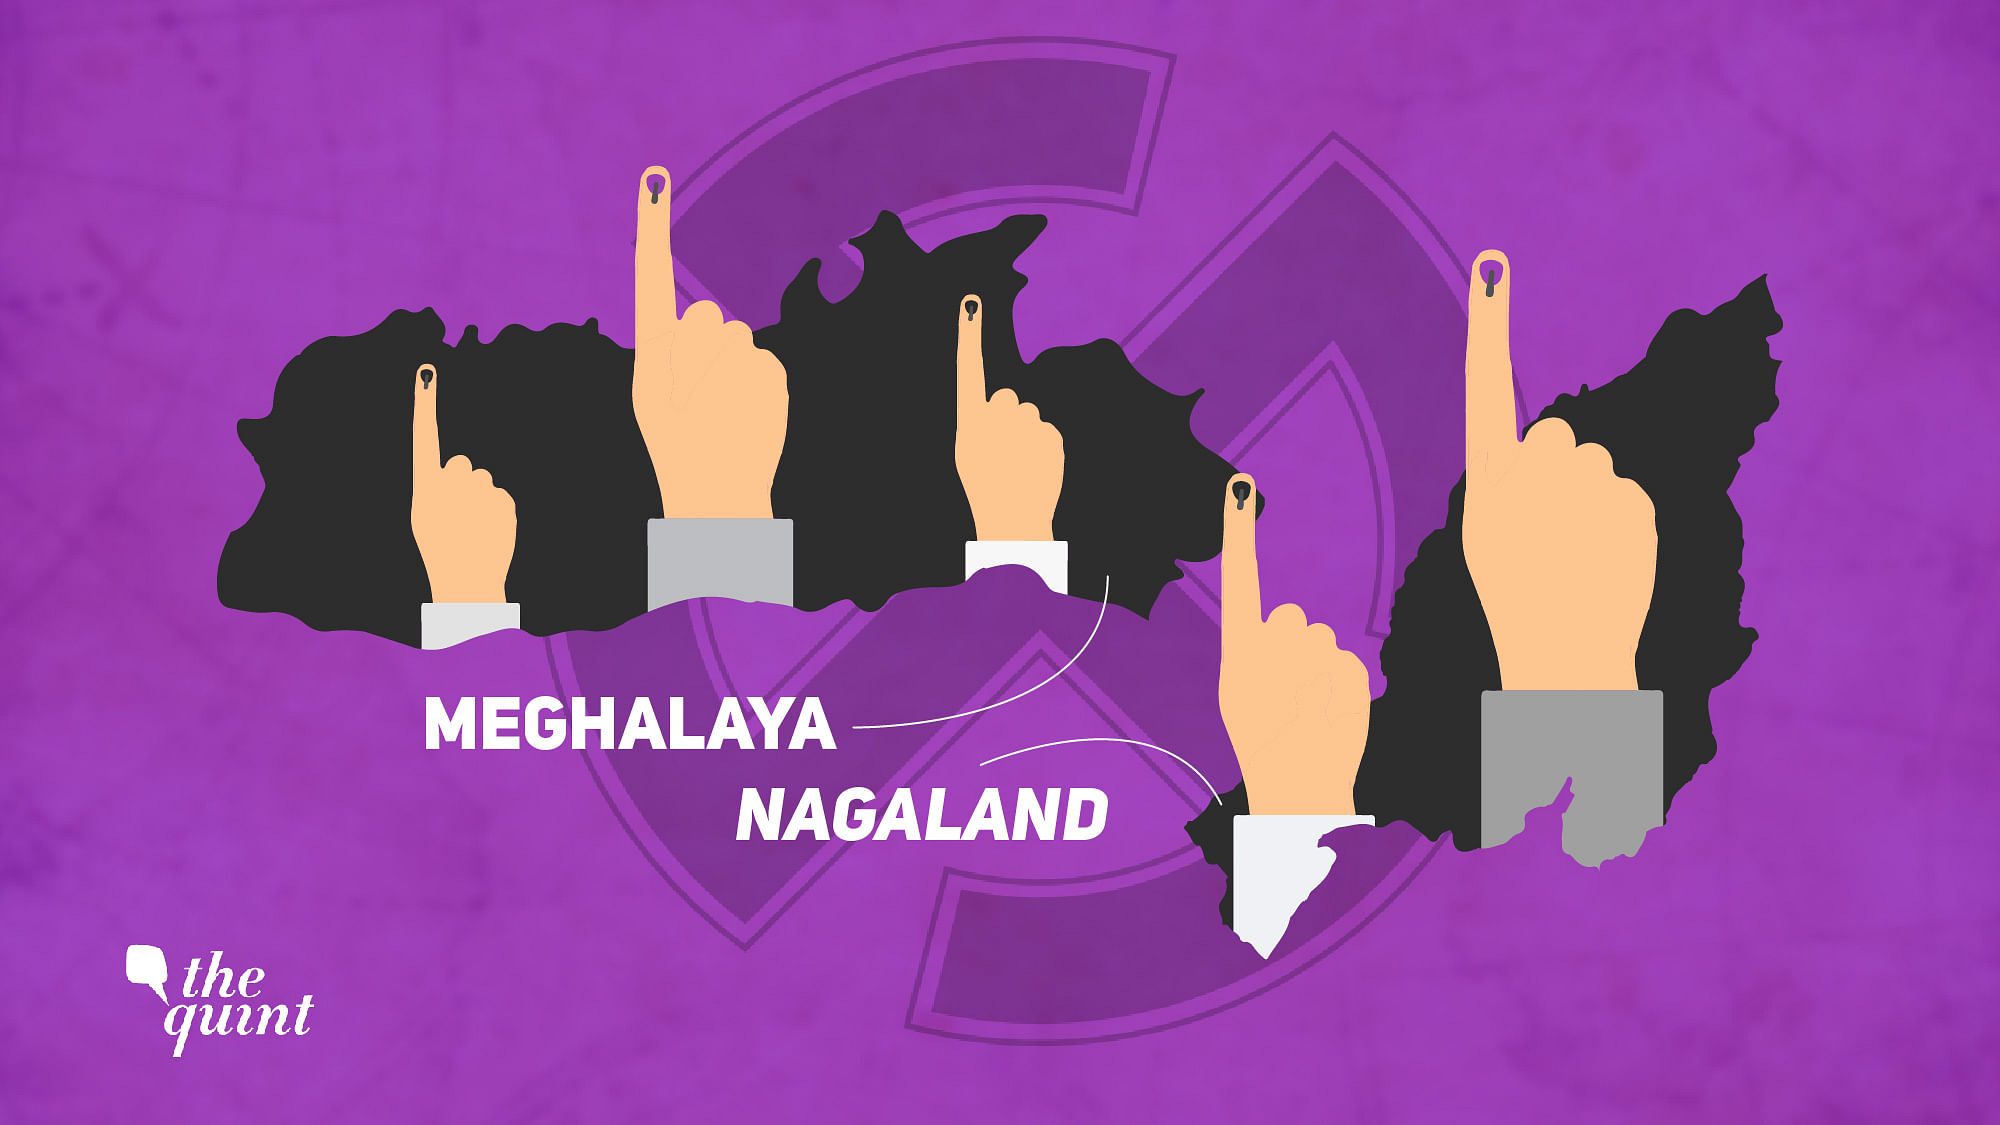 The results for the Assembly elections in Meghalaya and Nagaland will be announced along with that of Tripura on 3 March. 